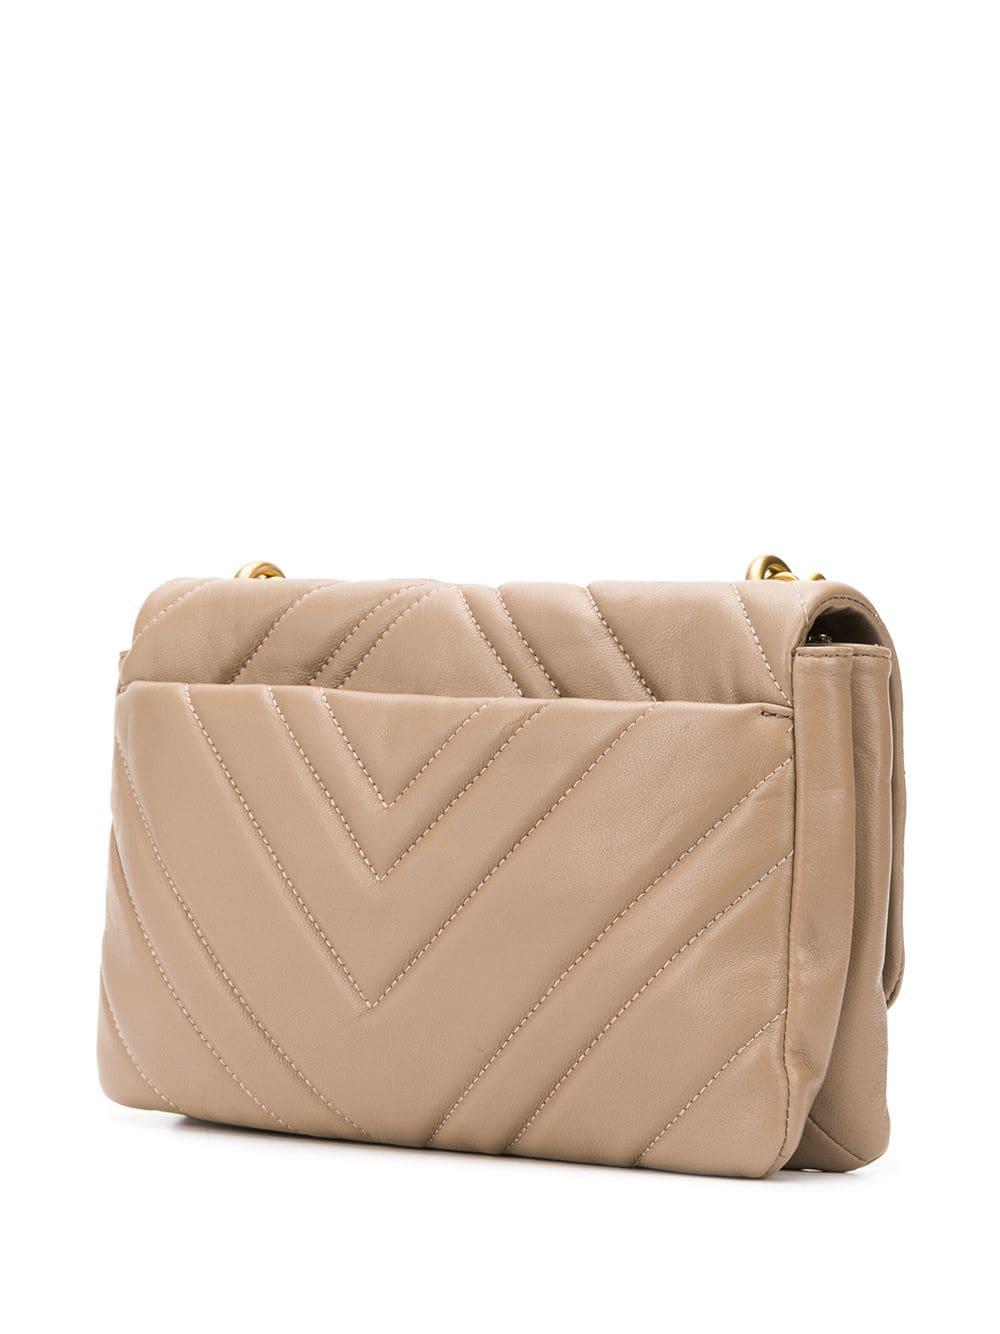 DKNY Vivian Quilted Crossbody Bag in Natural | Lyst